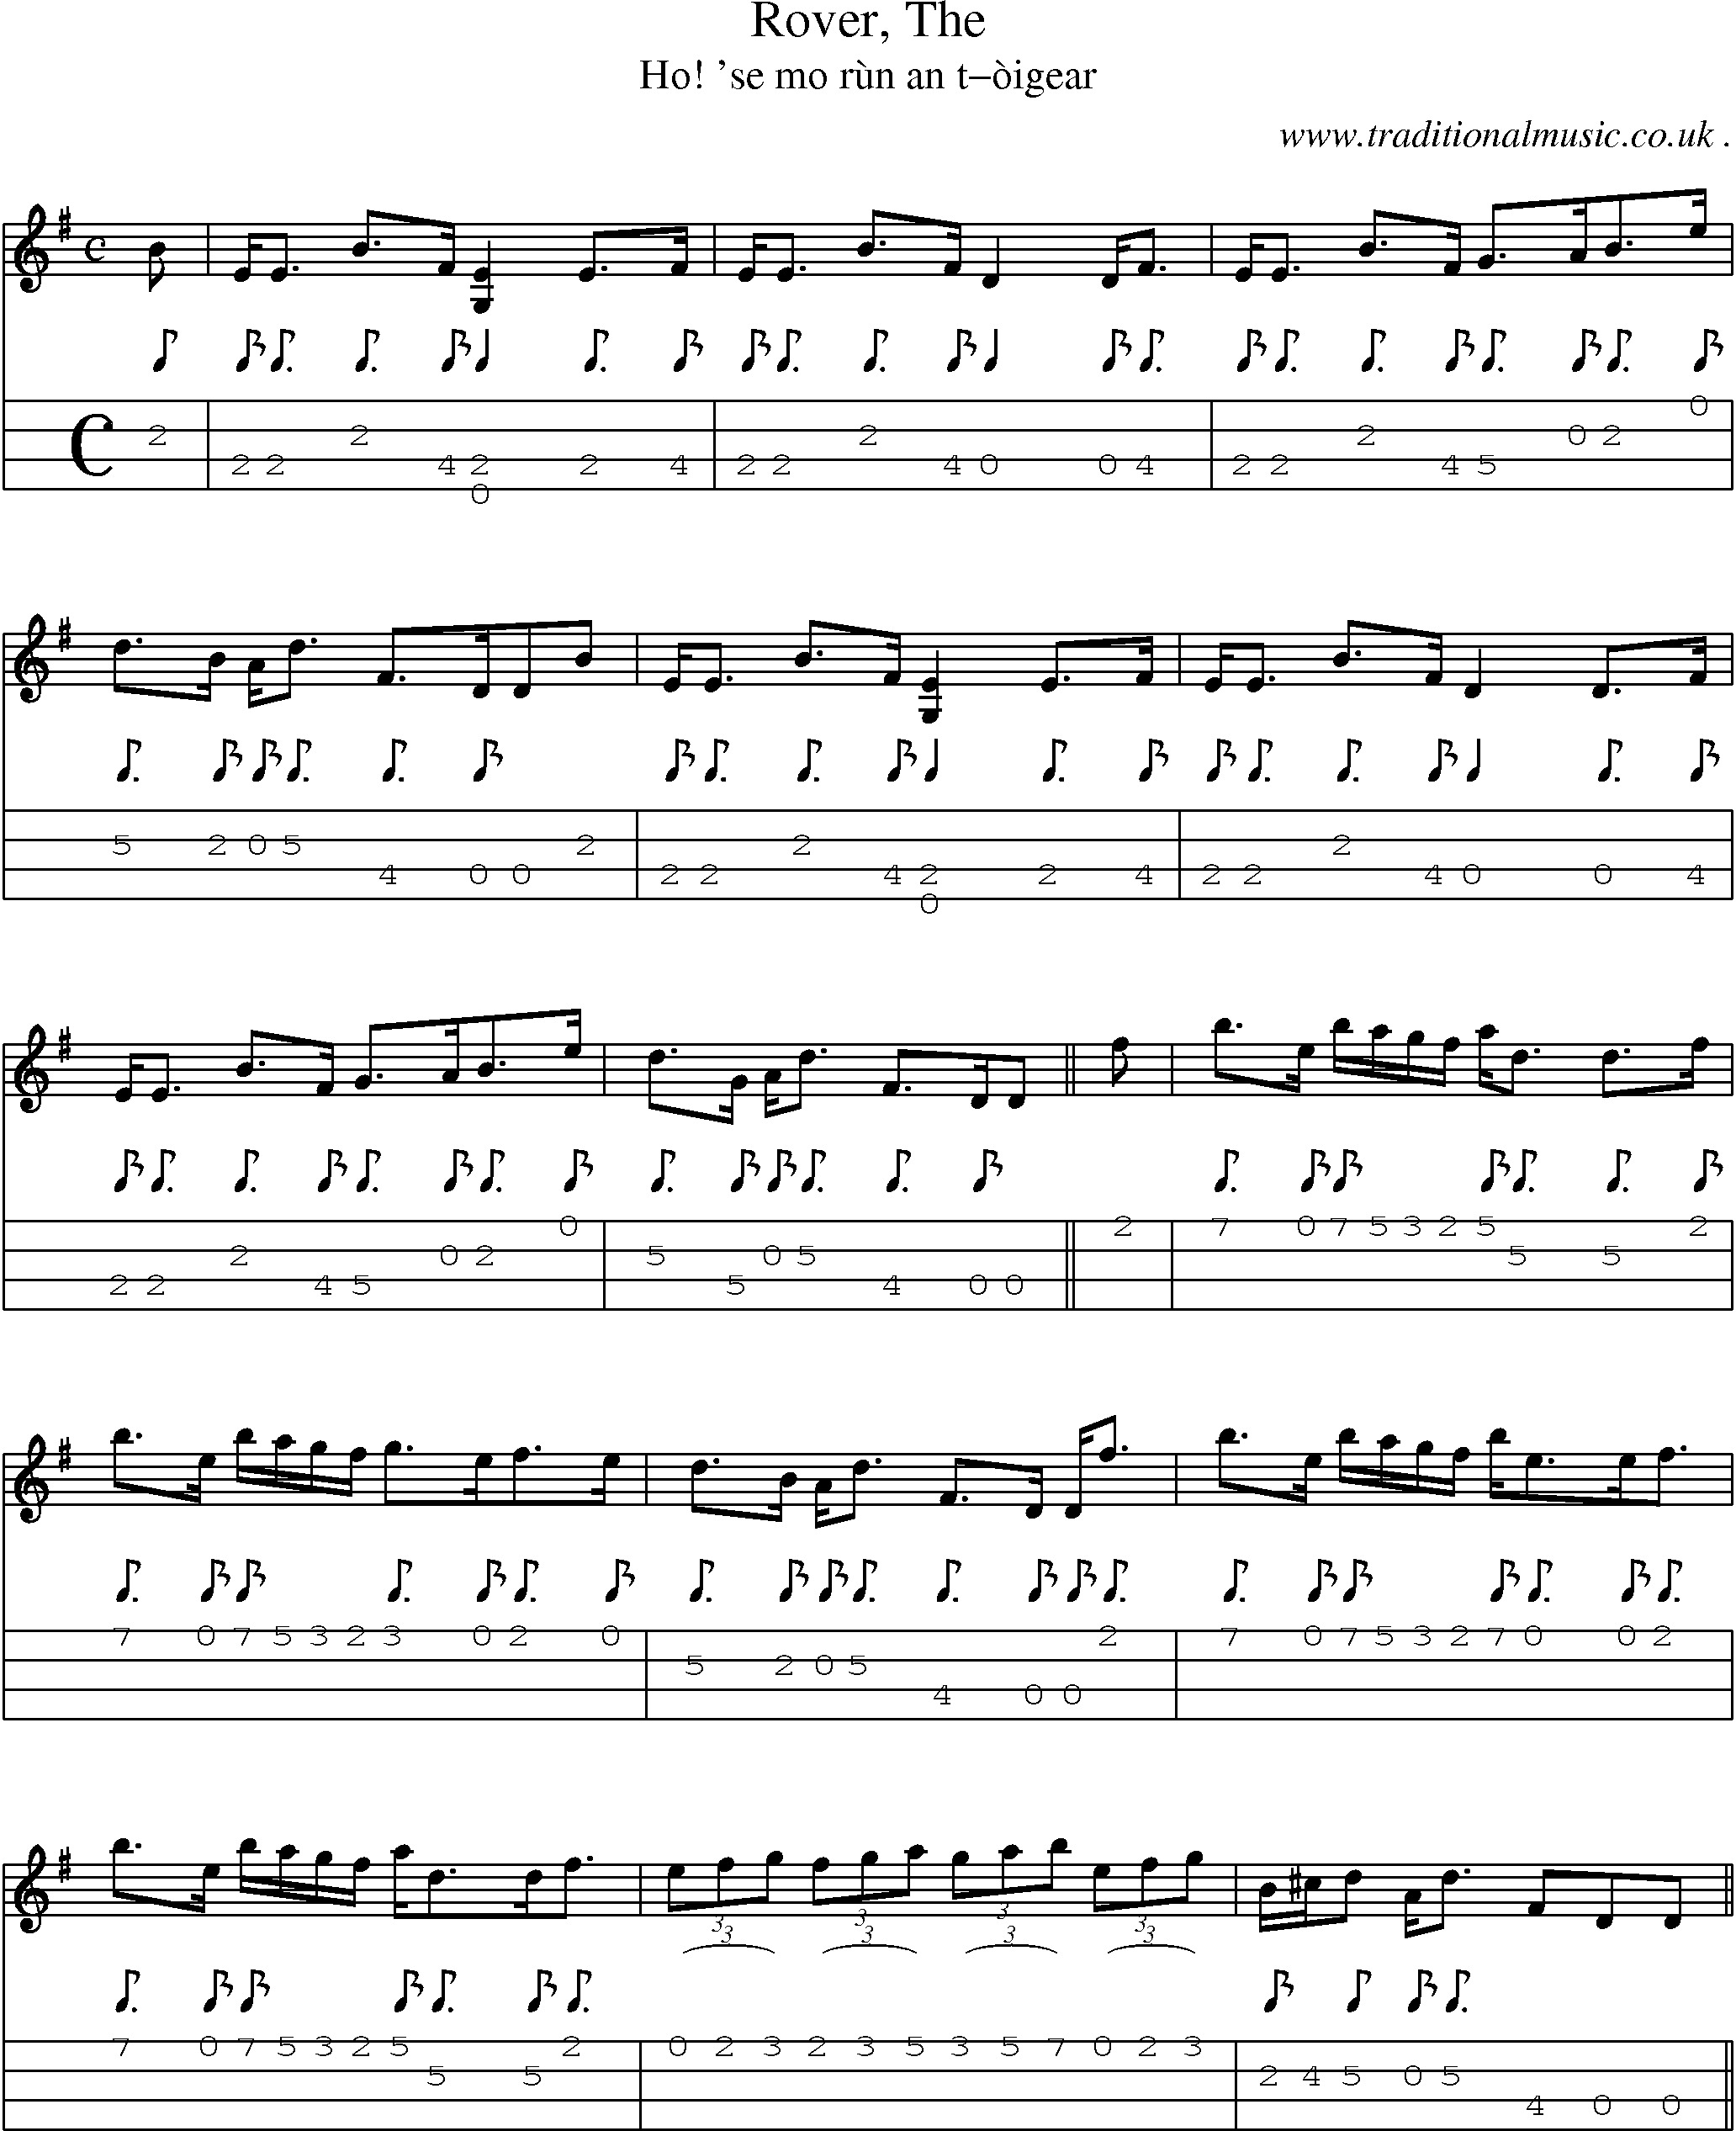 Sheet-music  score, Chords and Mandolin Tabs for Rover The